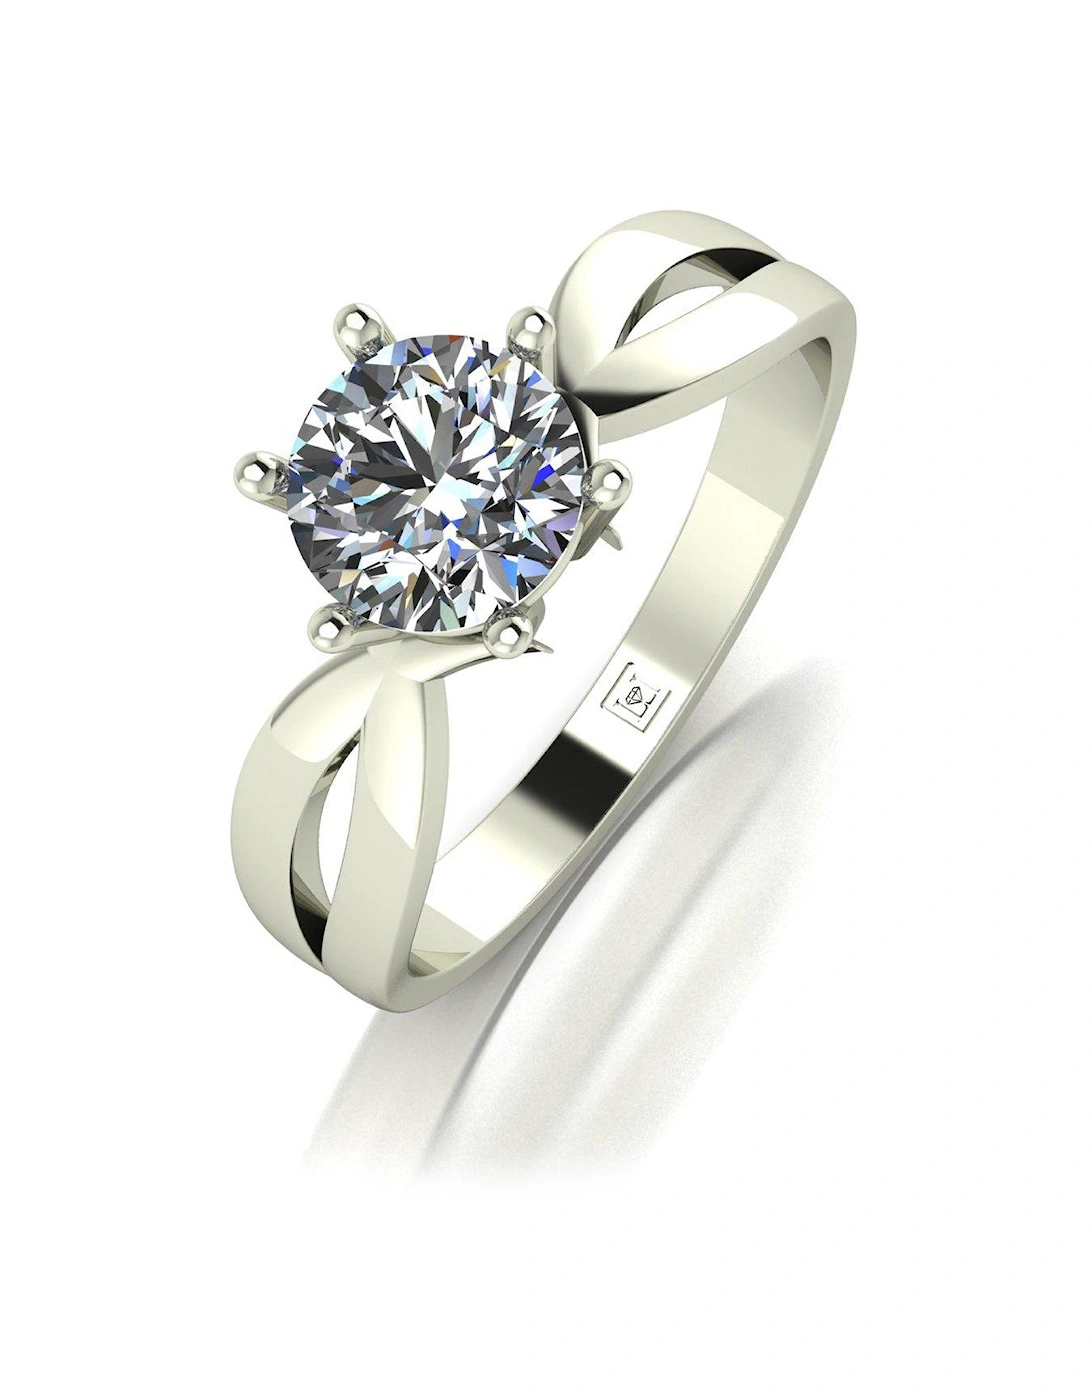 LADY LYNSEY 9CT WHITE GOLD 1.00ct SOLITAIRE RING, 2 of 1